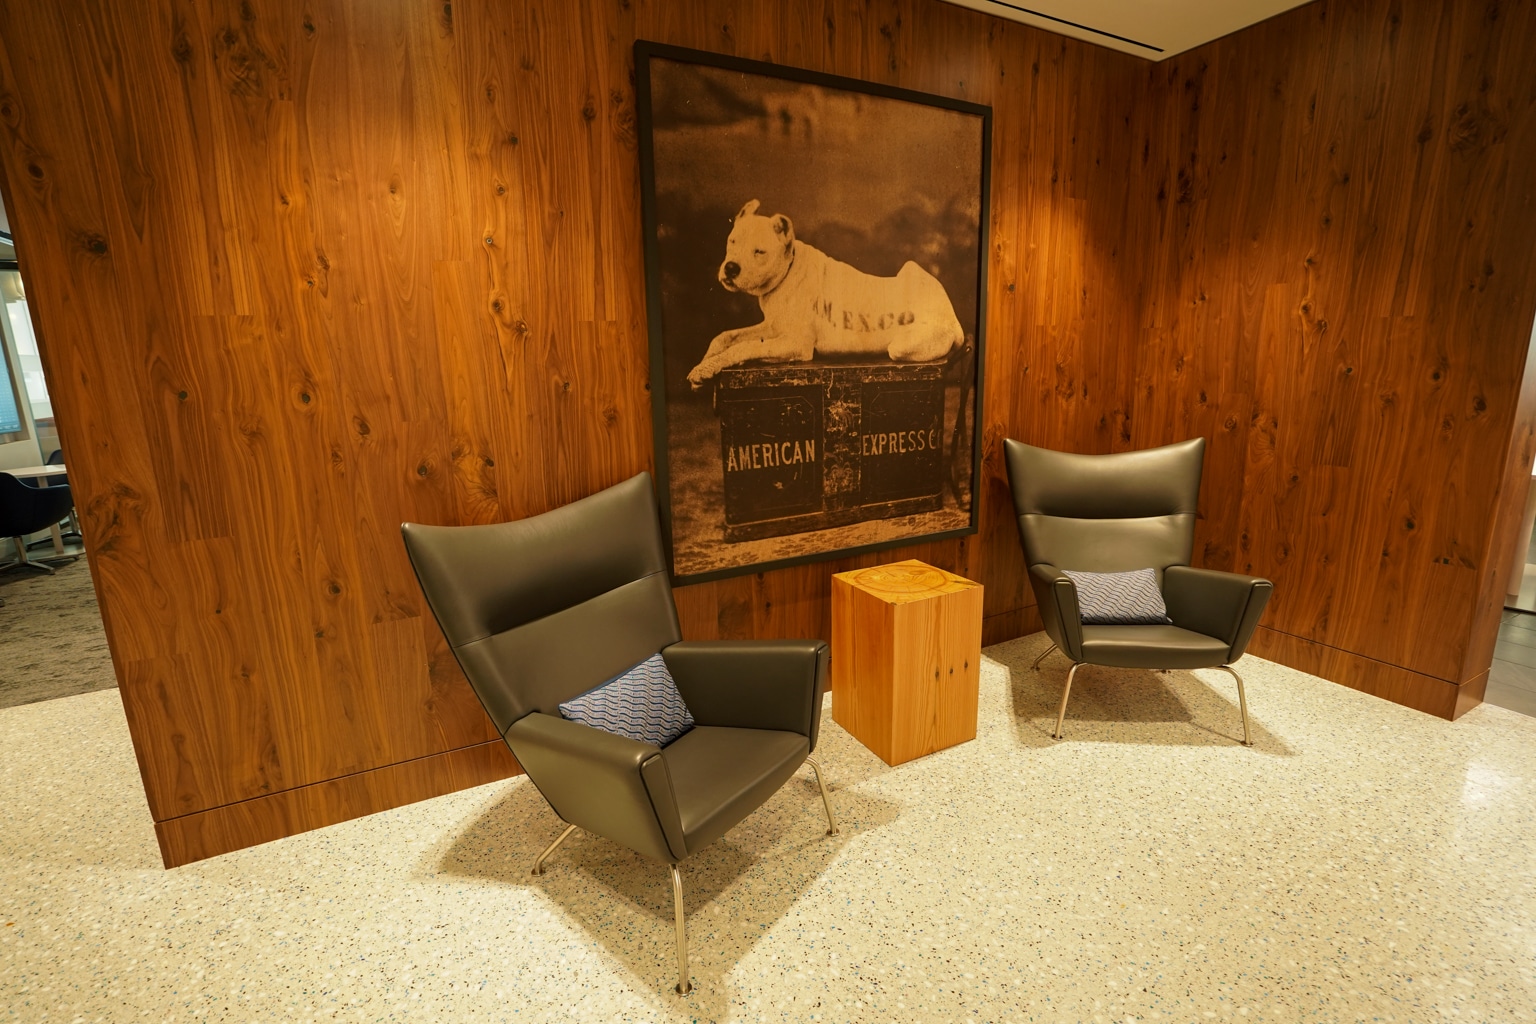 How to Access American Express Centurion Lounges